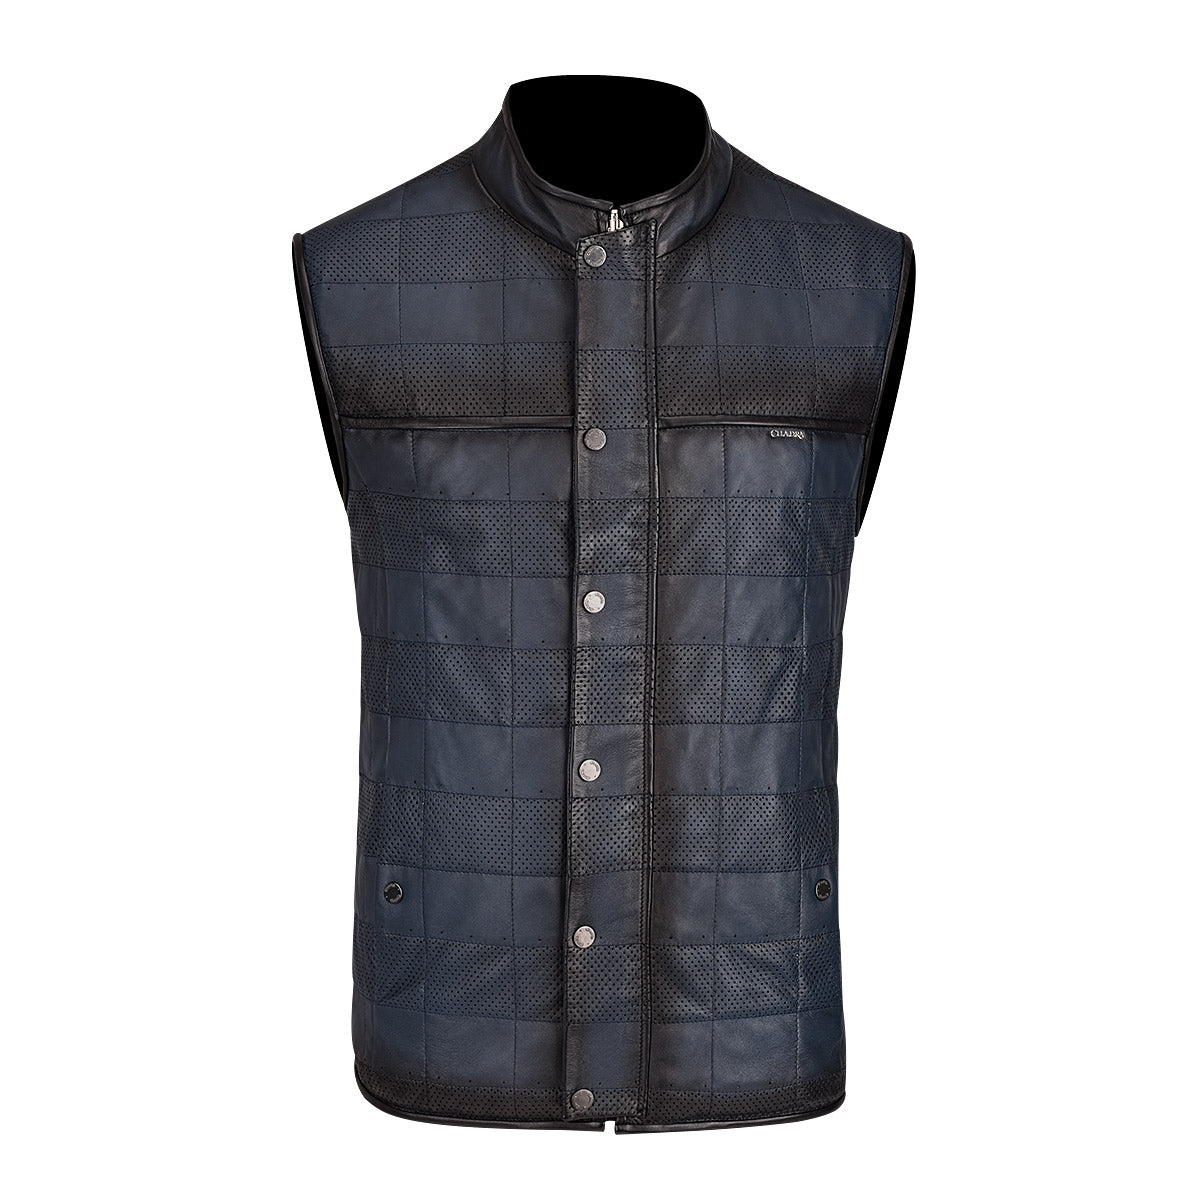 Double View Blue Vest presents subtle quilted embroidery with perforations on the front and sides